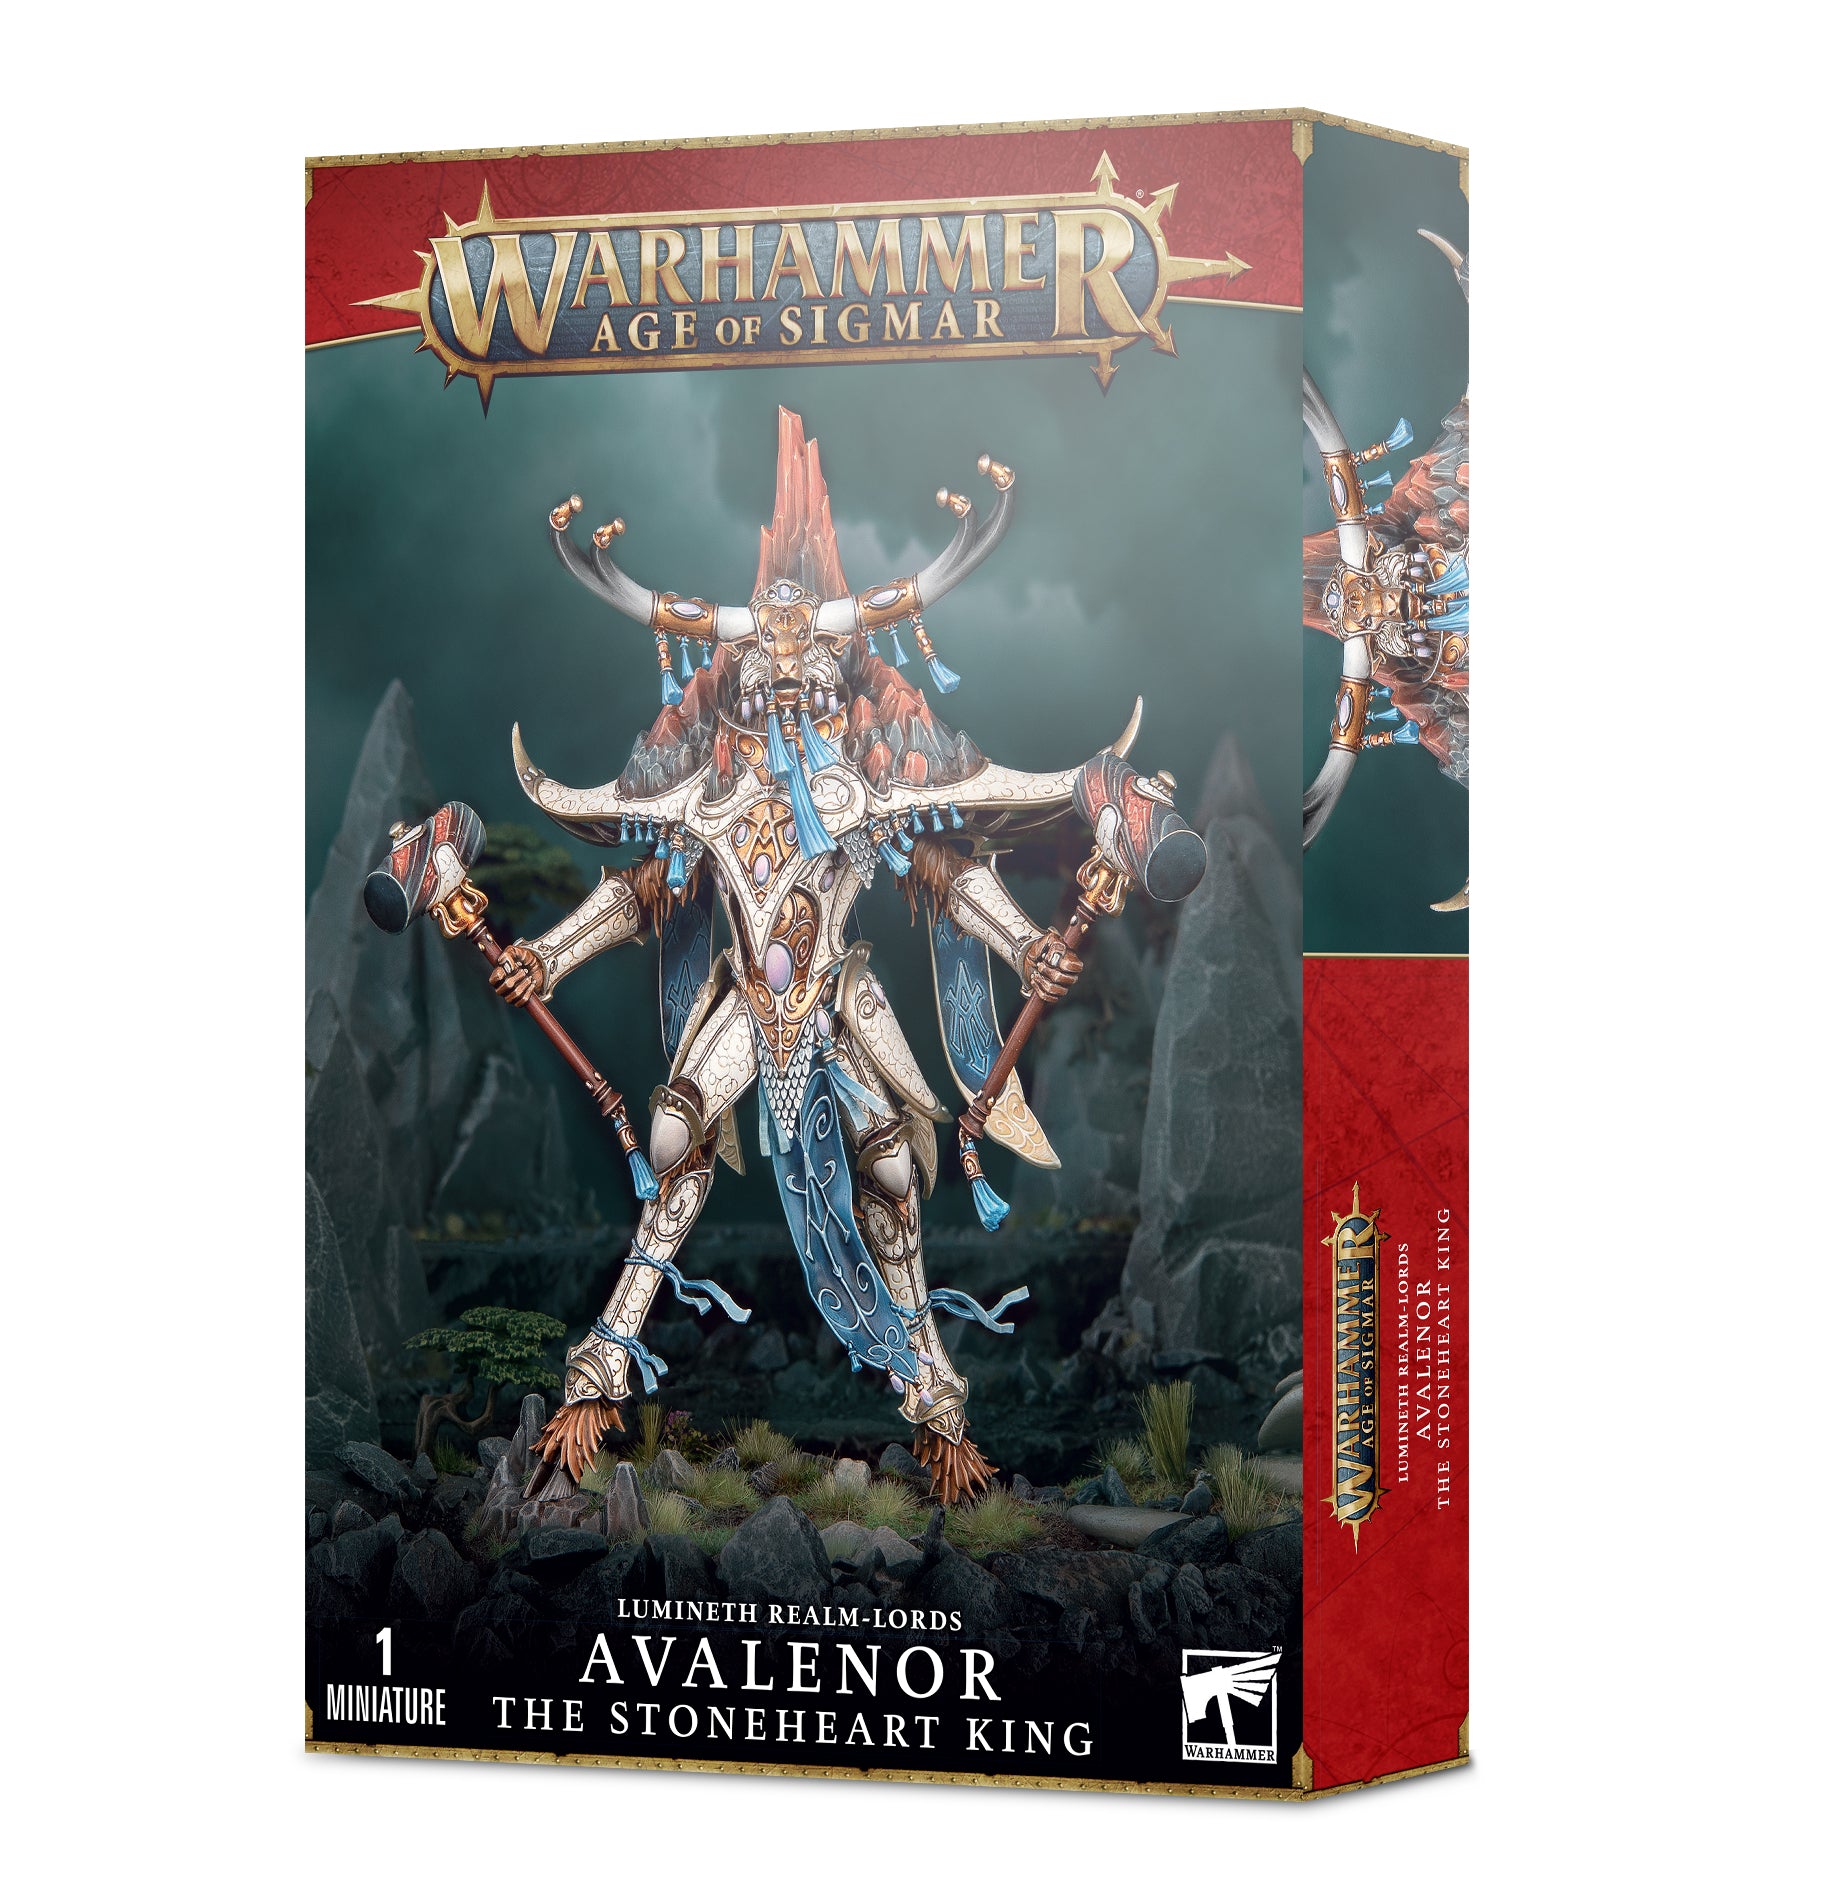 Warhammer Age of Sigmar: Lumineth Realm-lords Avalenor The Stoneheart King